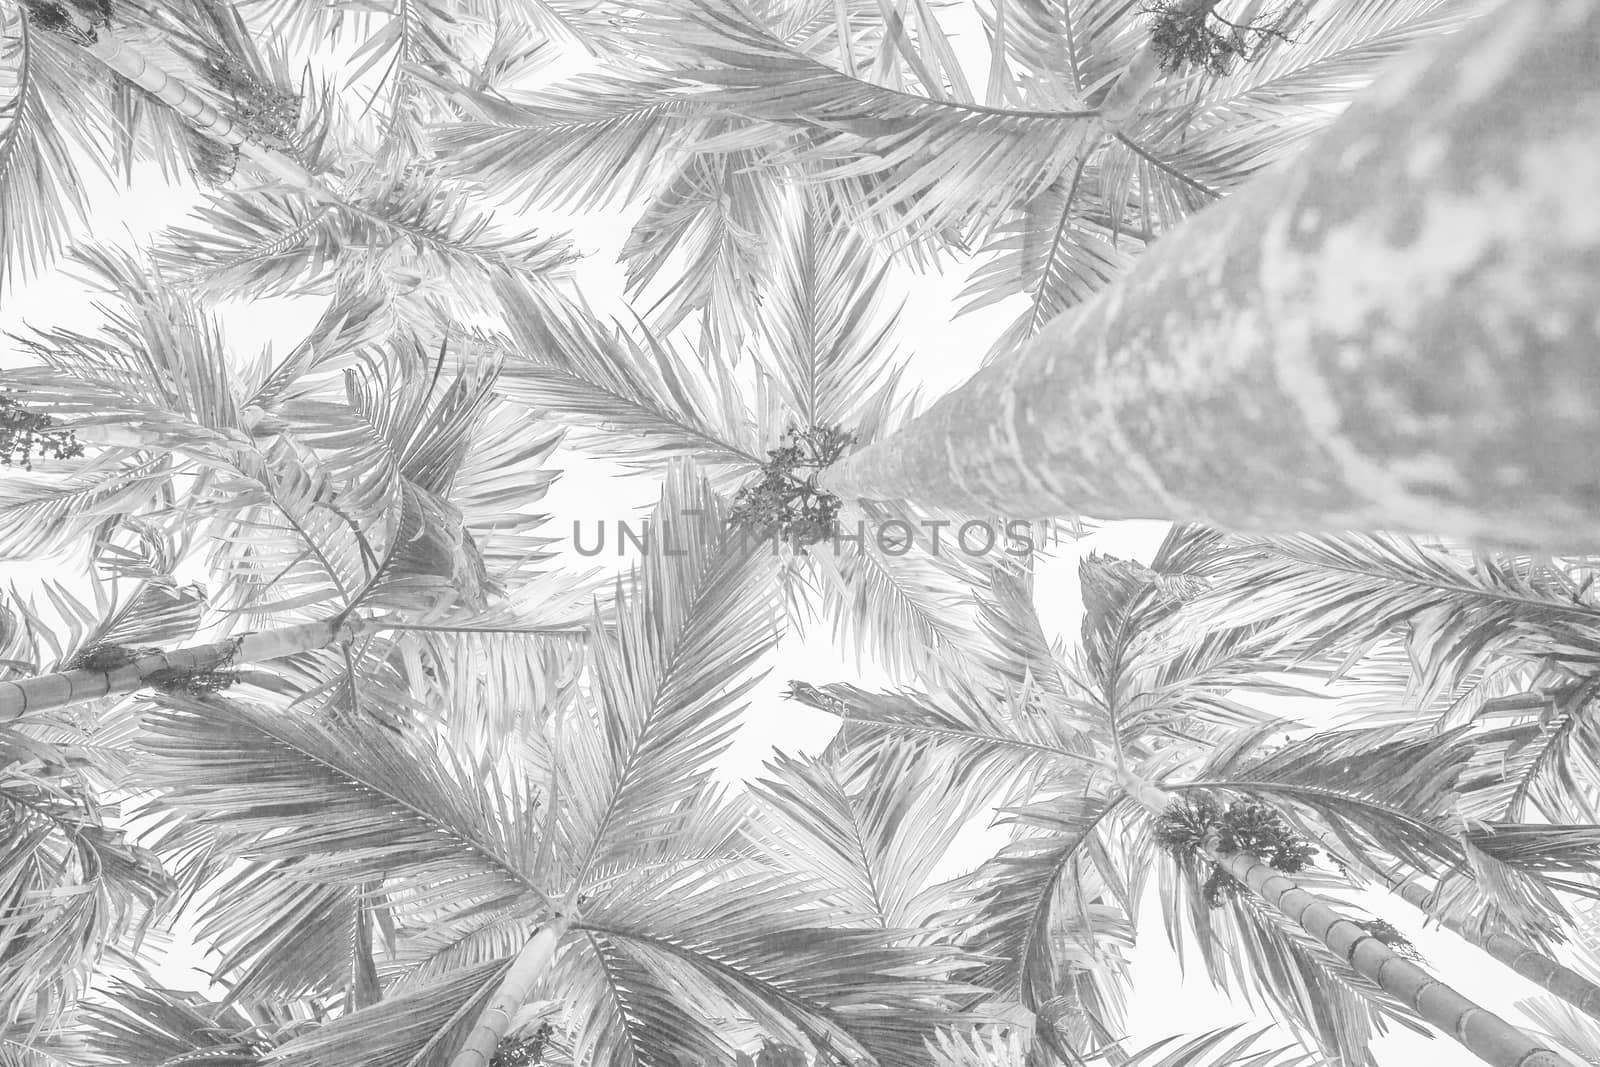 White background texture of palm trees